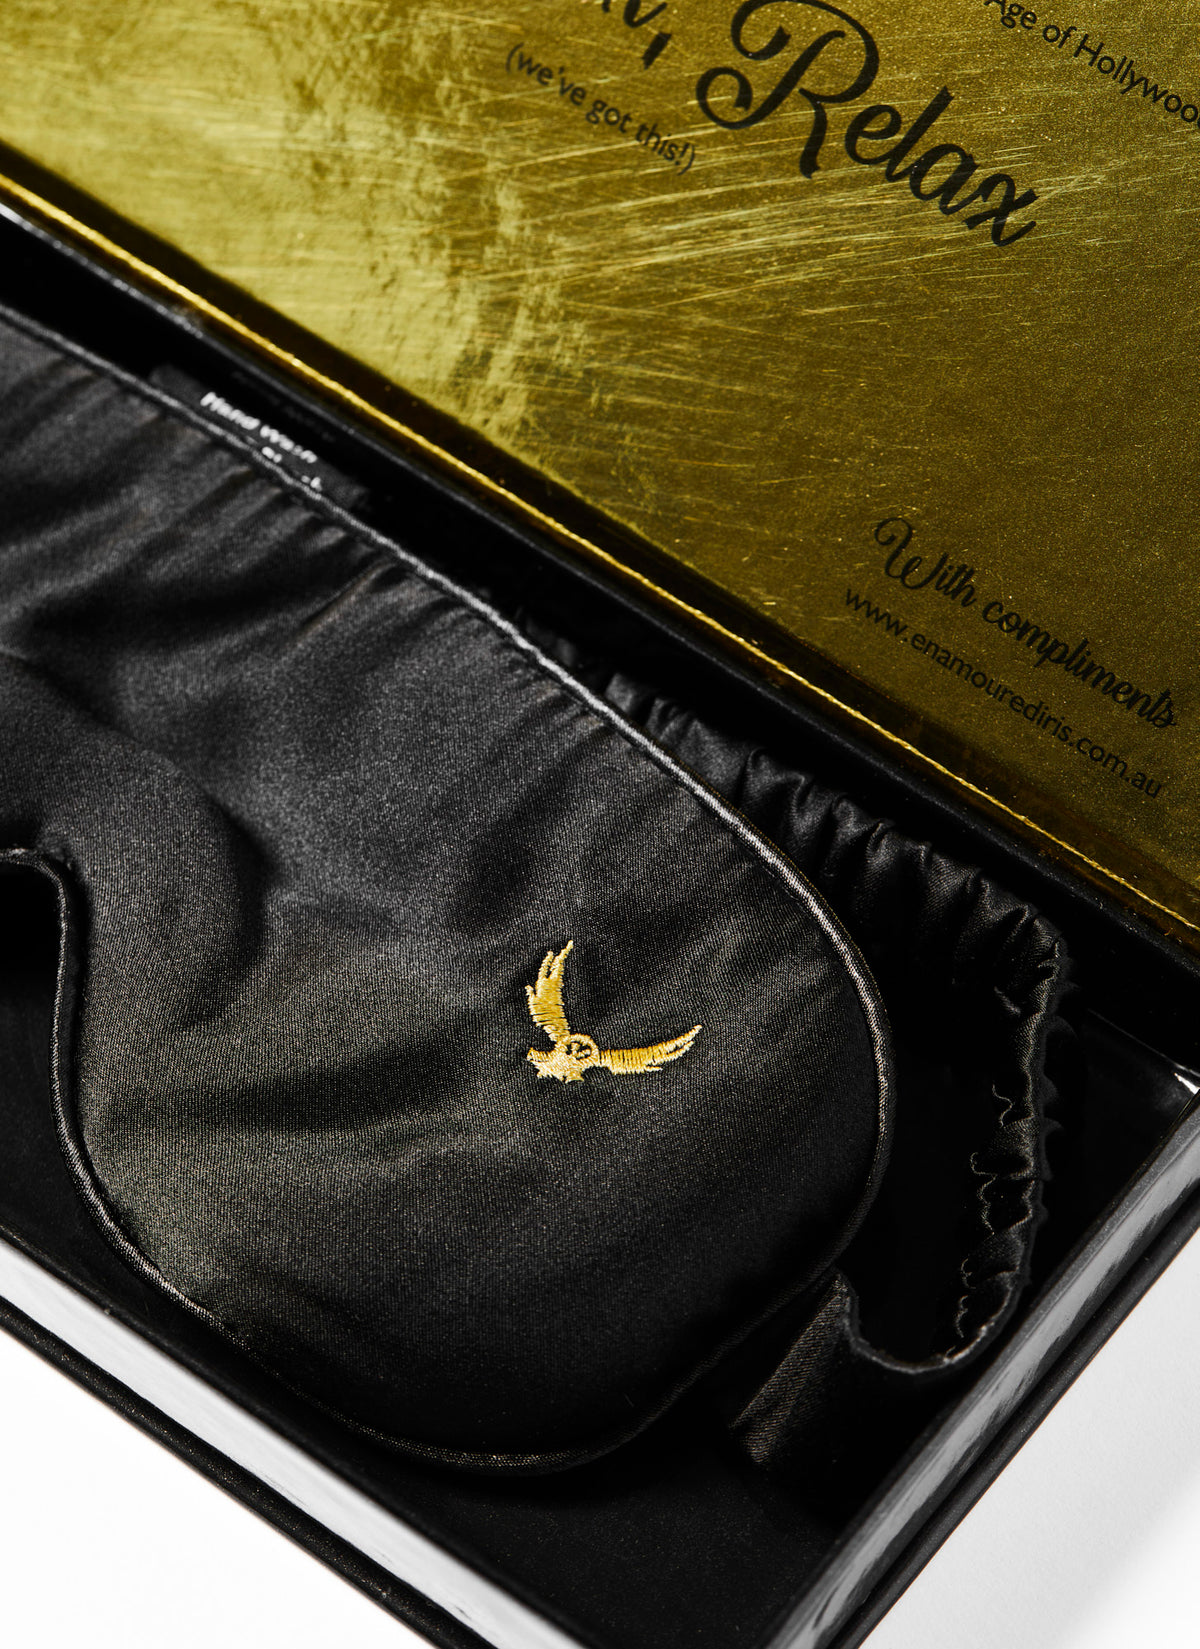 Close up of a silk black eye mask for video production crew in a gold box. Designed by Enamoured Iris